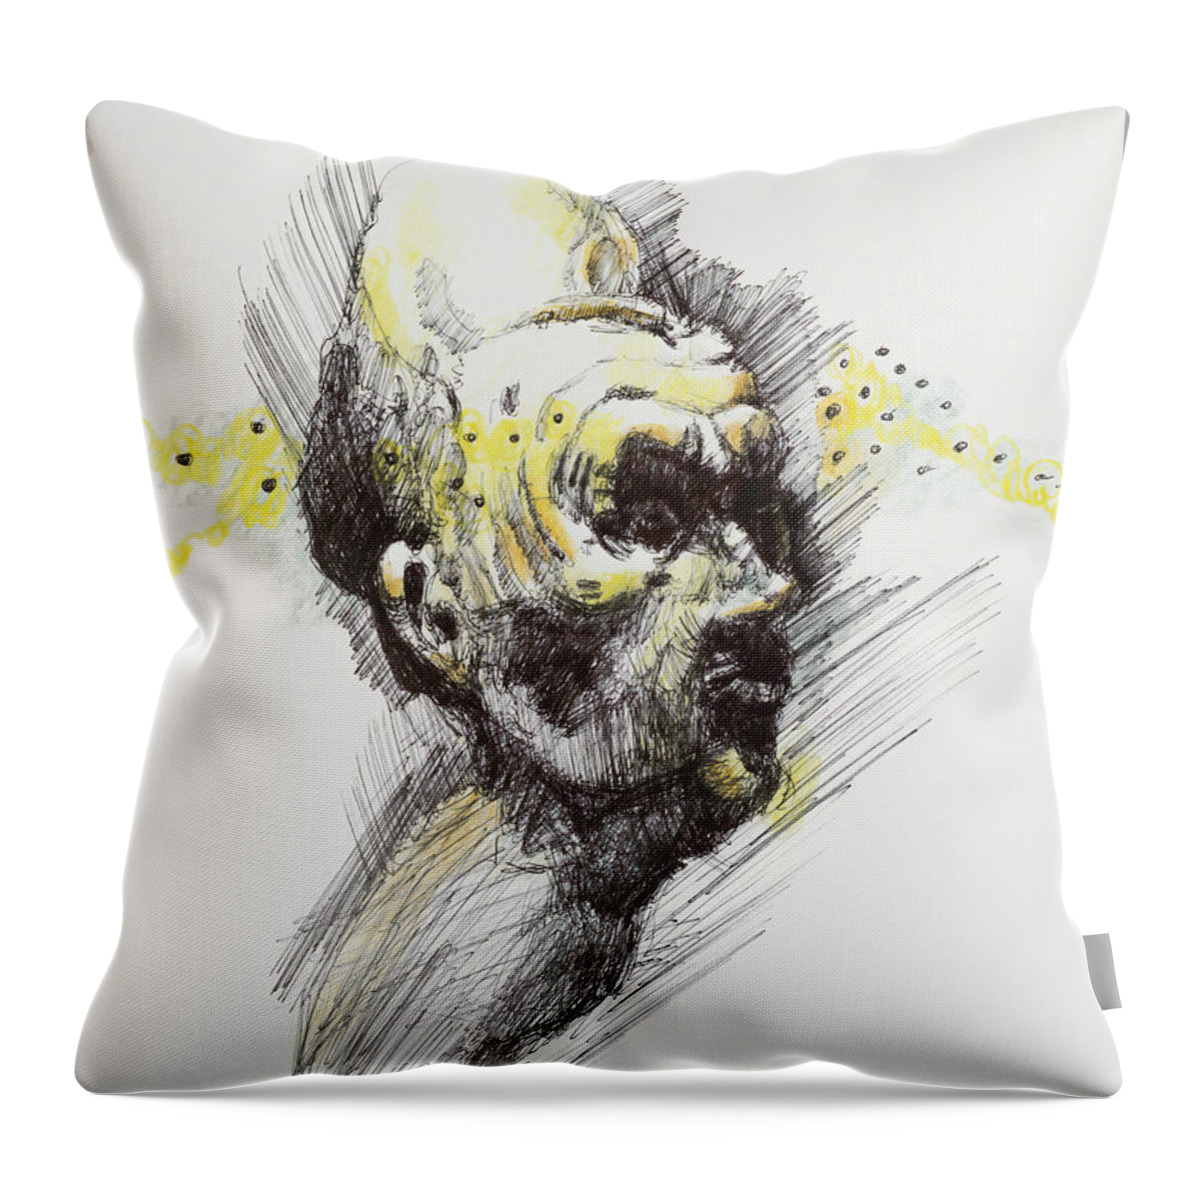 #bertillon Throw Pillow featuring the drawing The Dormant 1 by Veronica Huacuja